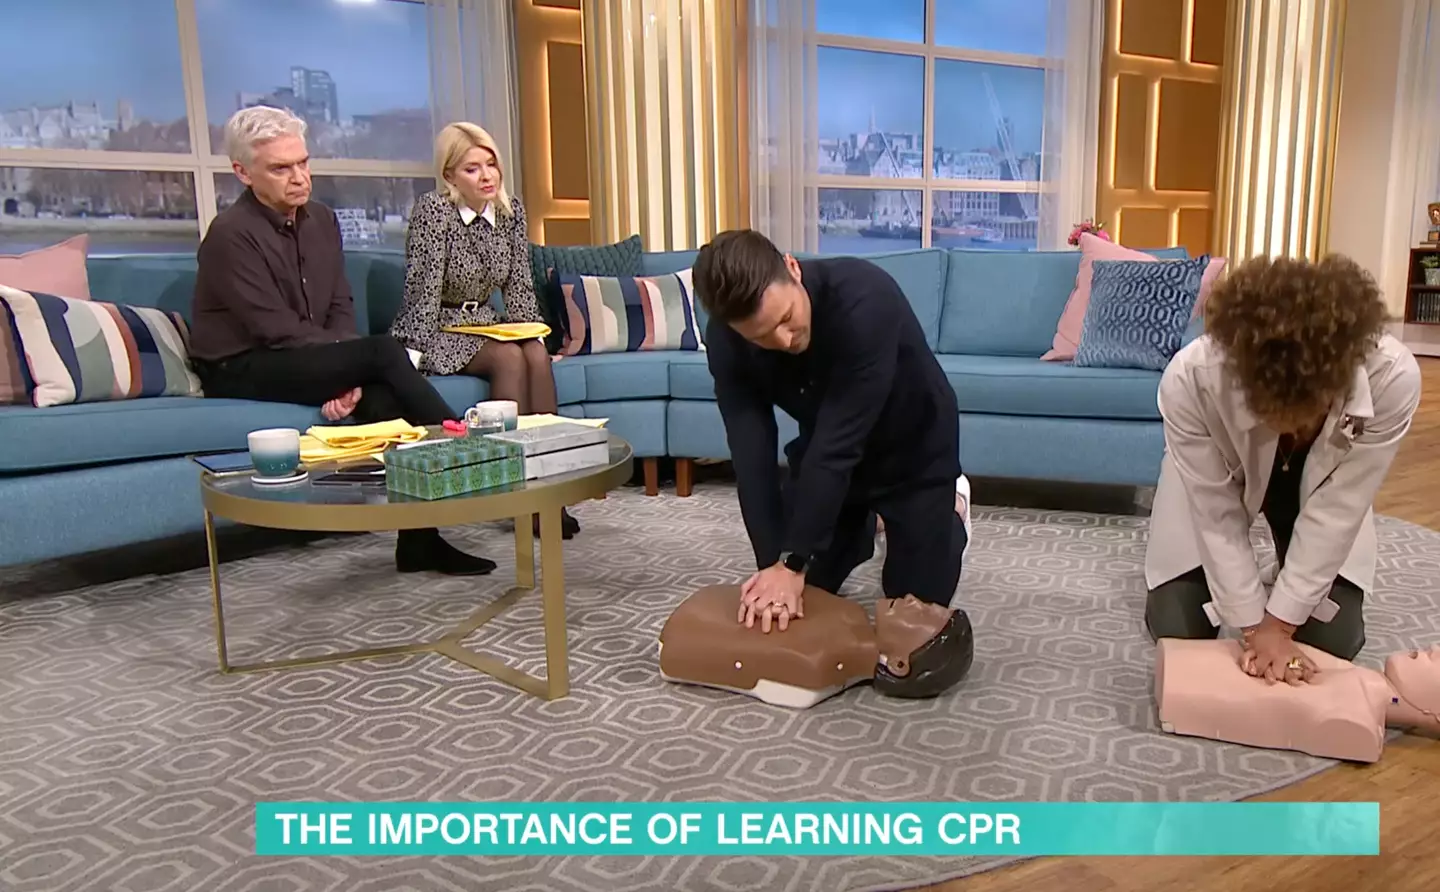 He explained the importance of learning CPR.